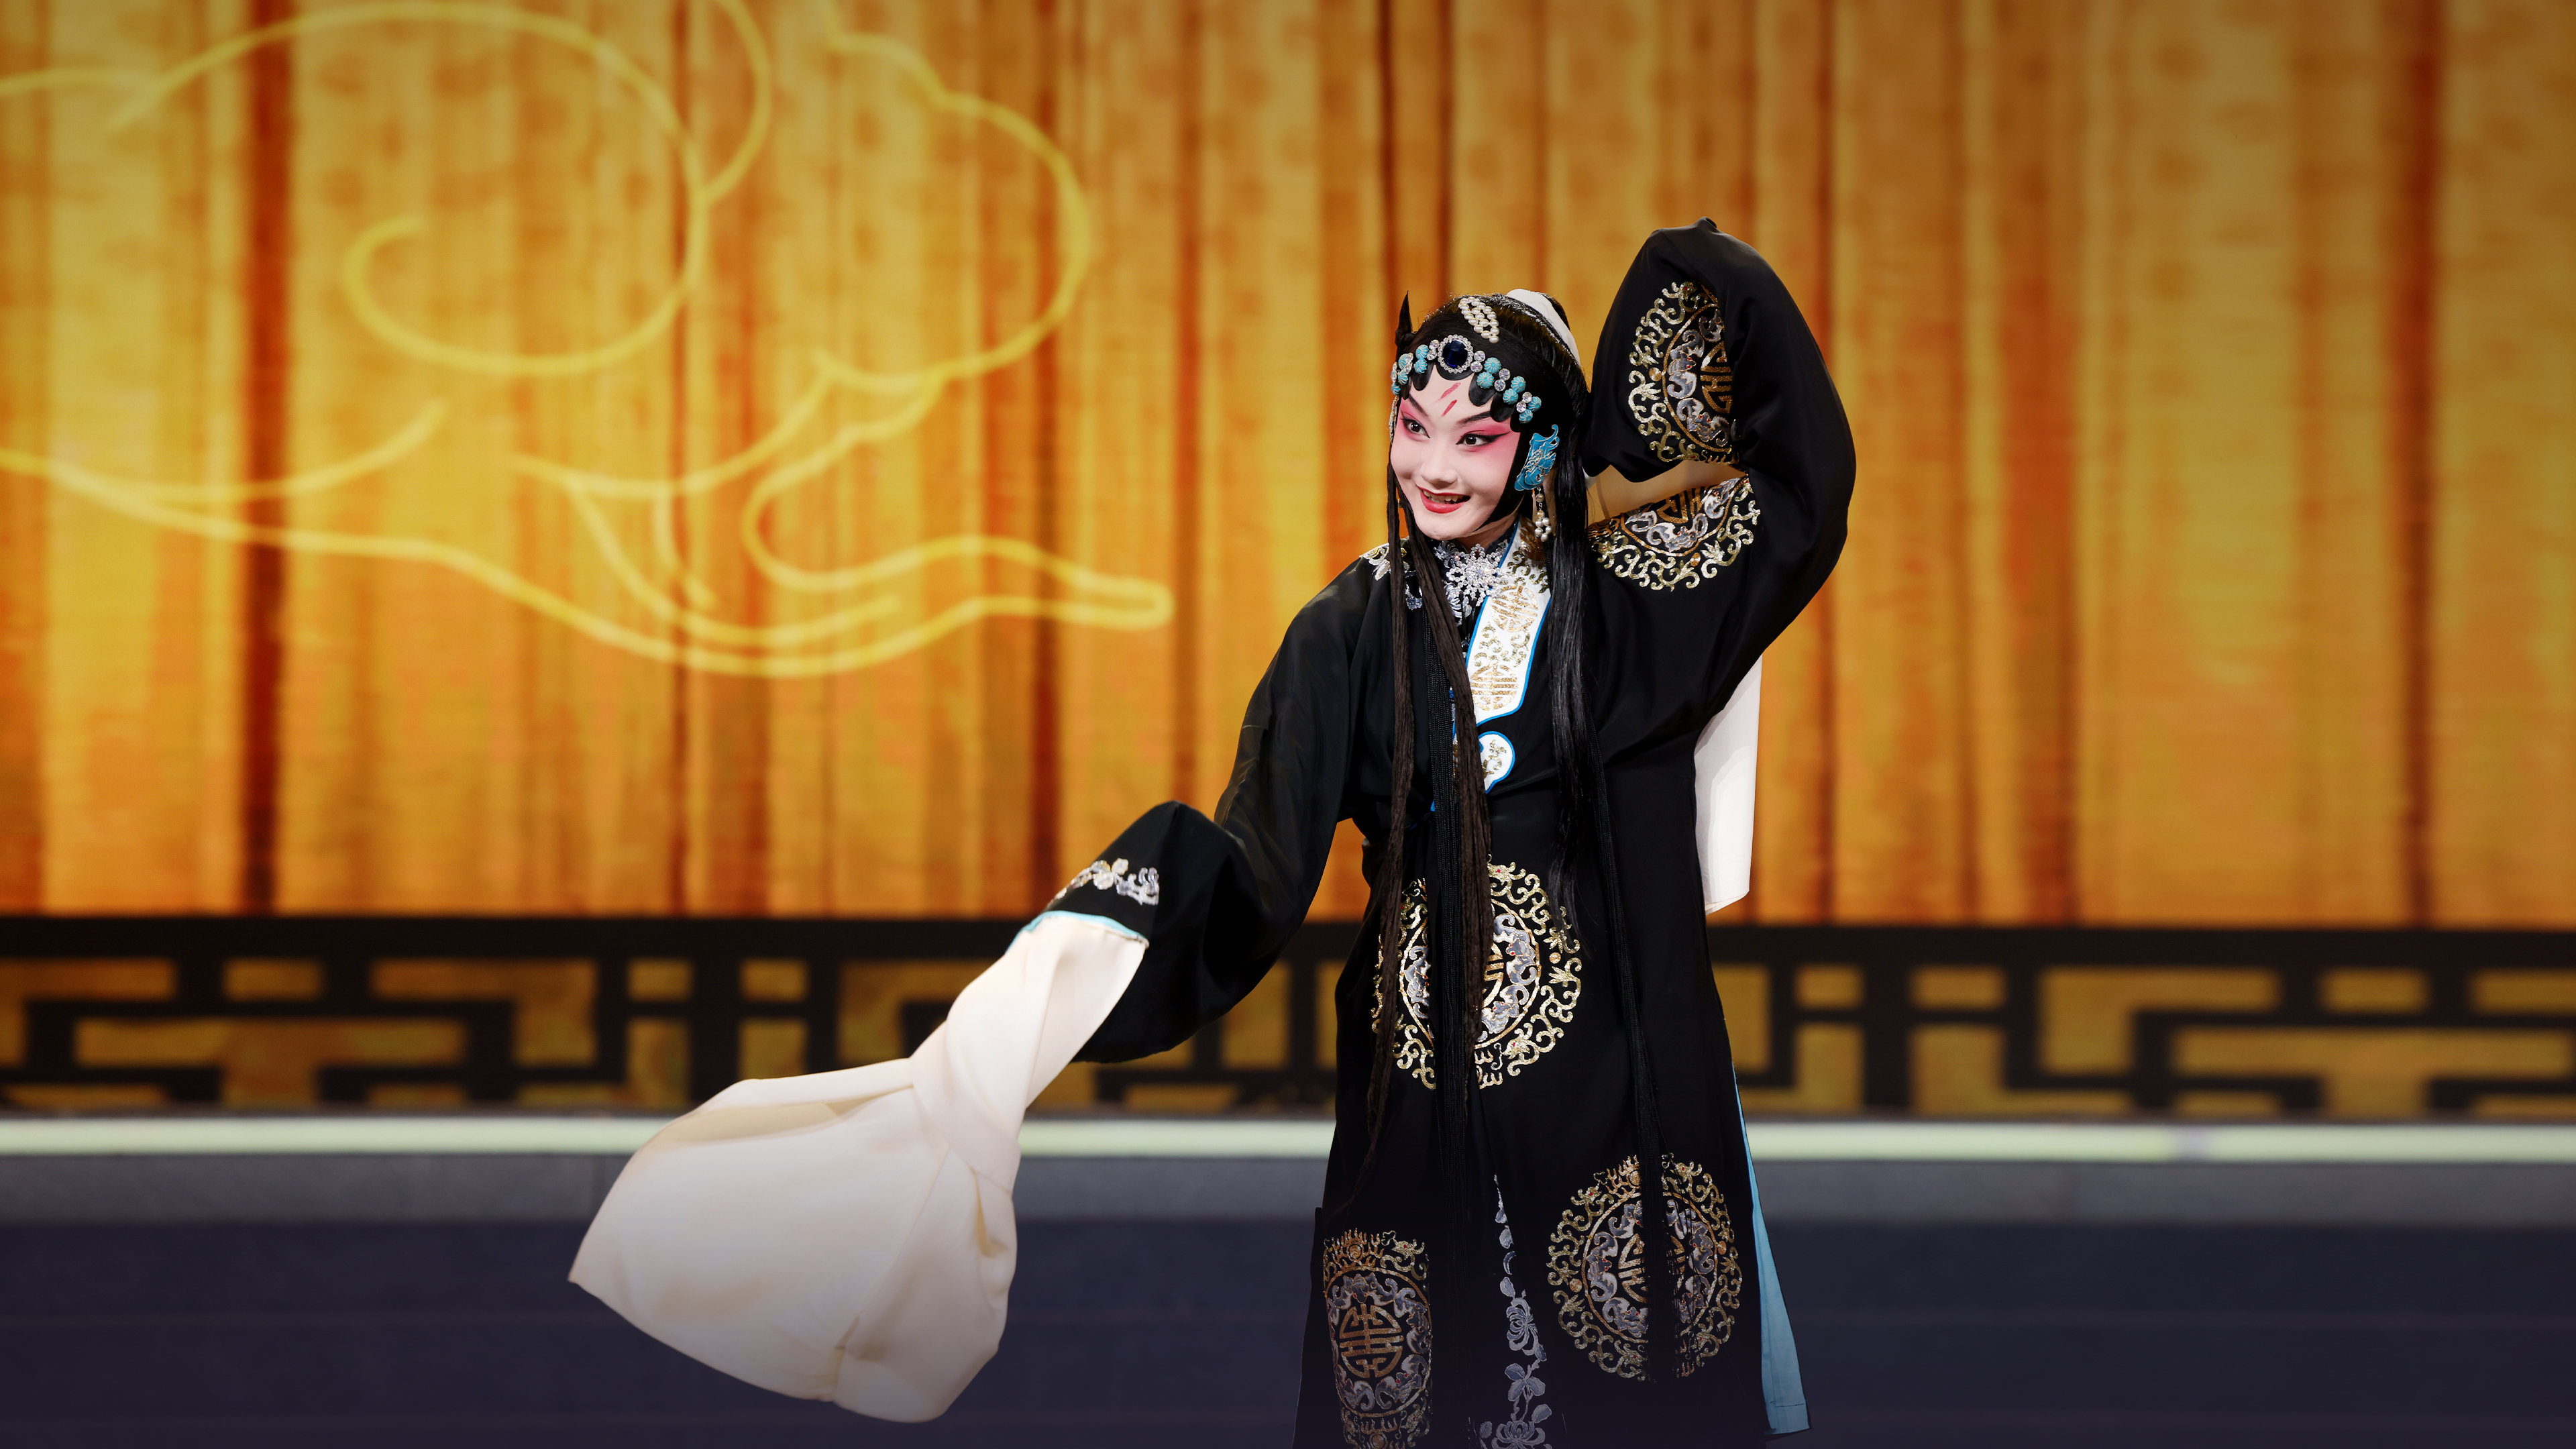 A young Peking Opera actress performs on stage in Beijing, China, in this undated photo. /Photo provided to CGTN